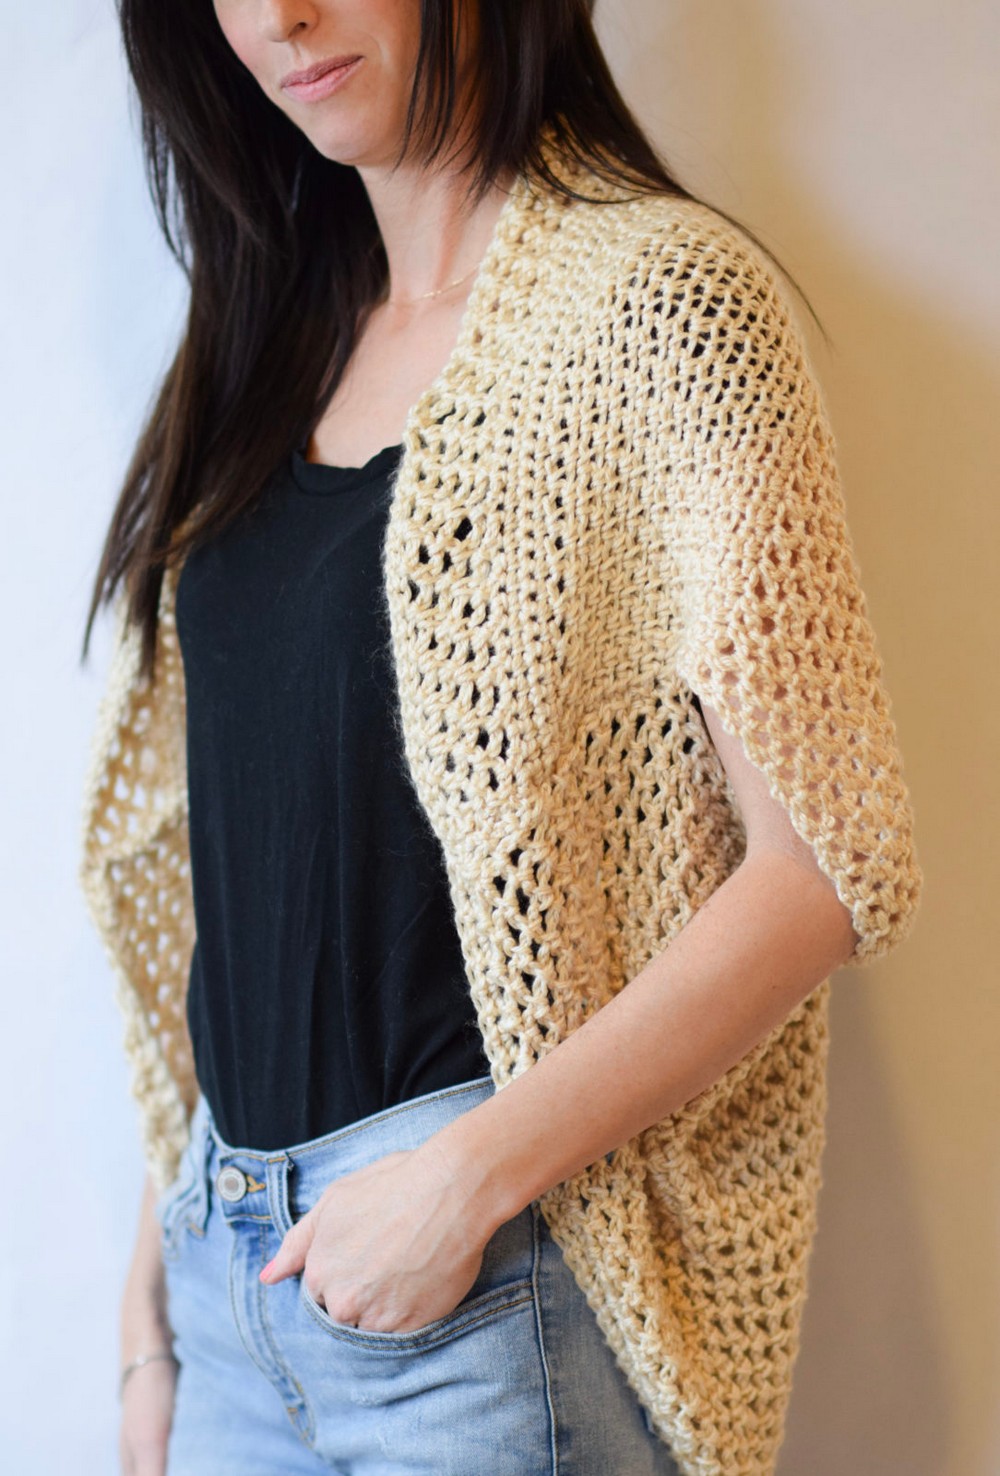 Crochet the Mod Mesh Honey Blanket Sweater with a free pattern